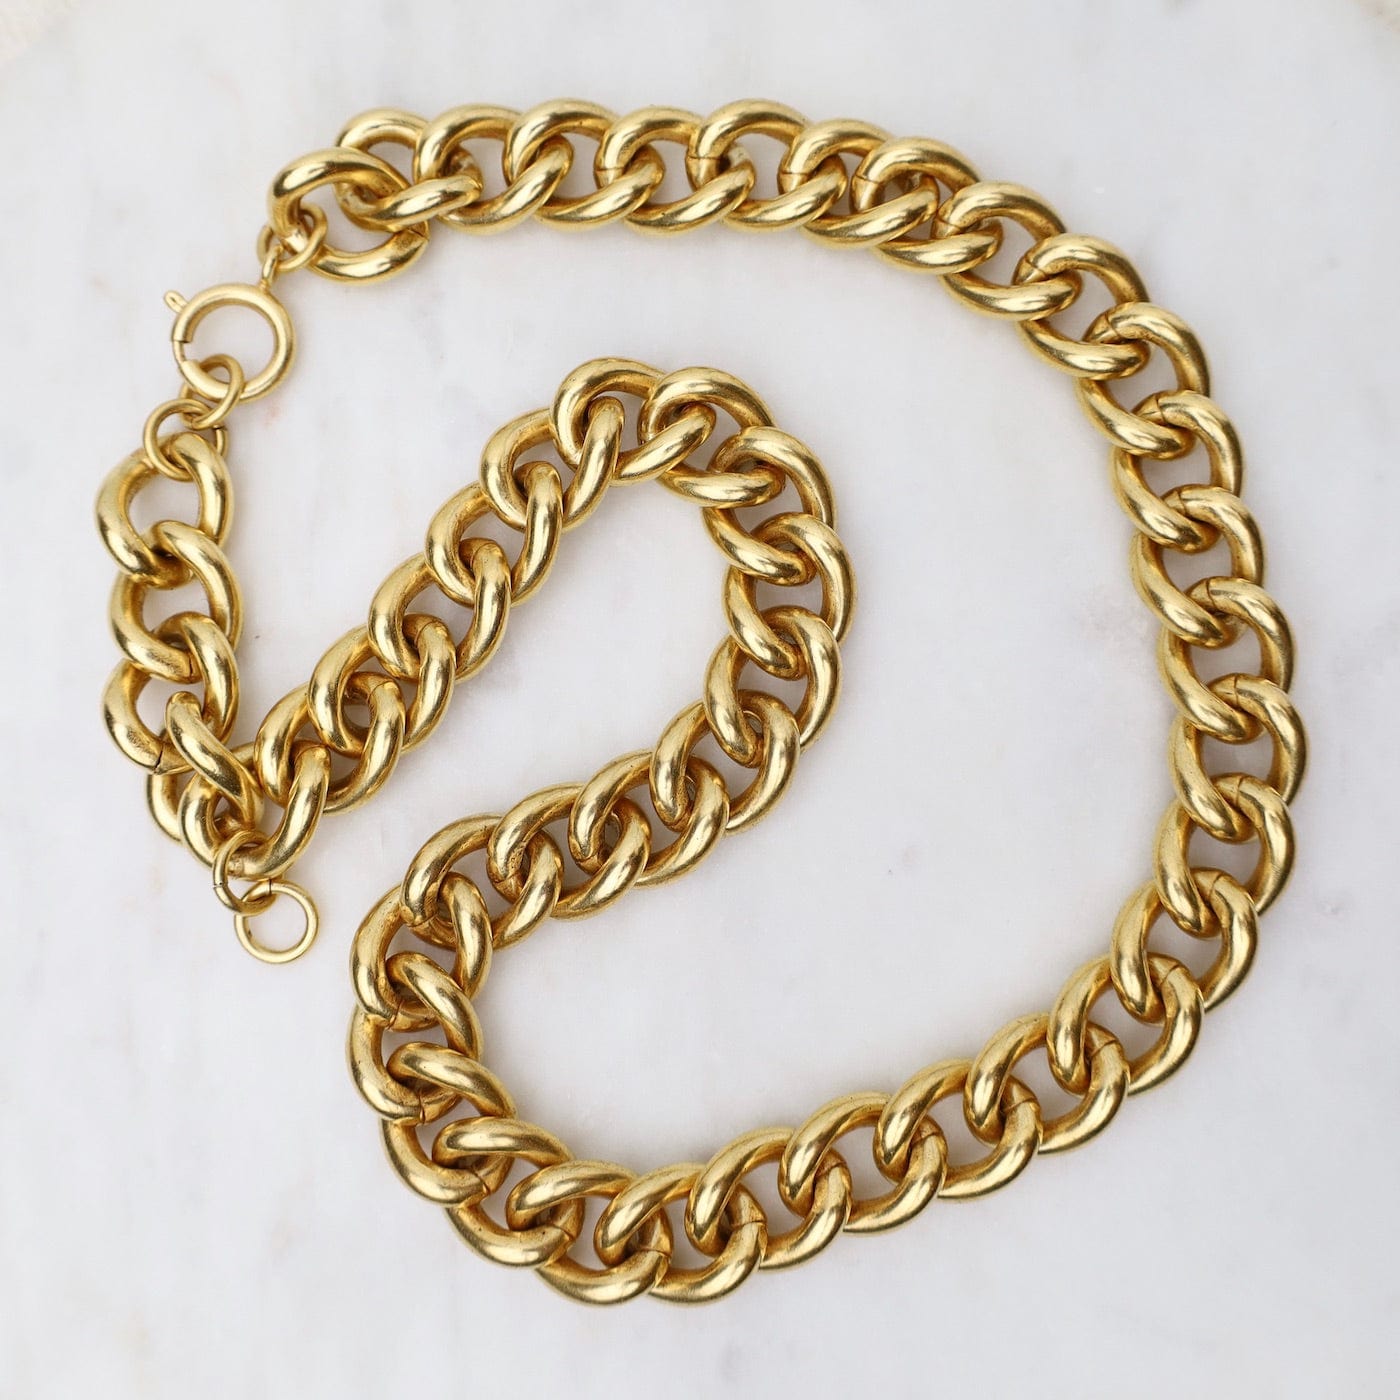 NKL-JM Gold Heavy Curb Chain Necklace